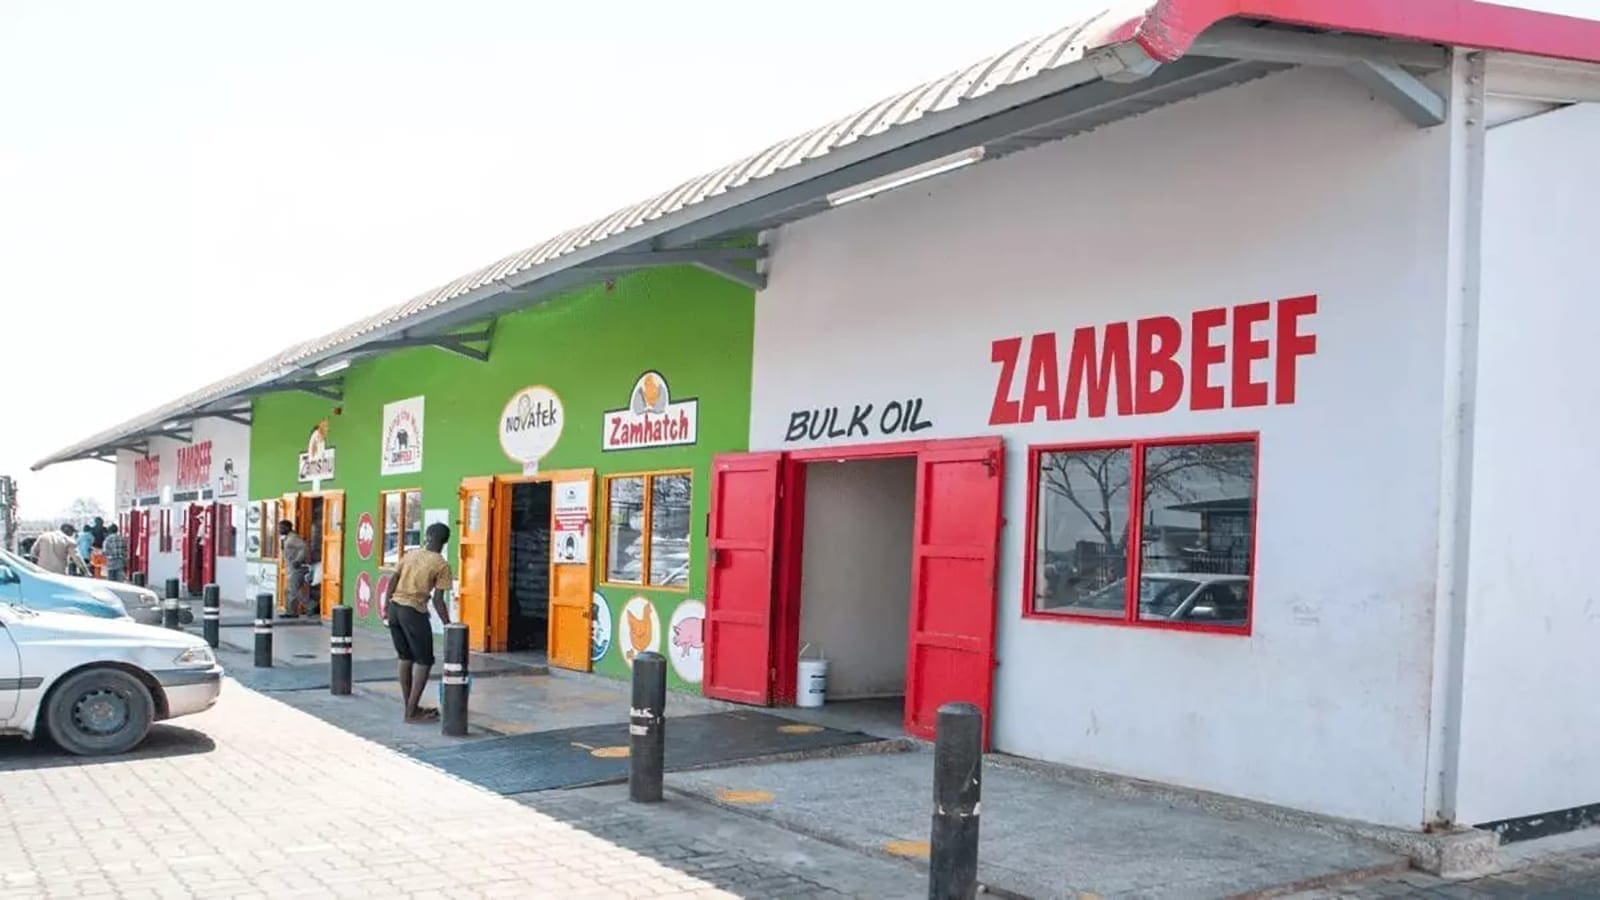 Zambeef Products eyes new markets with new ISO 22000 Certification